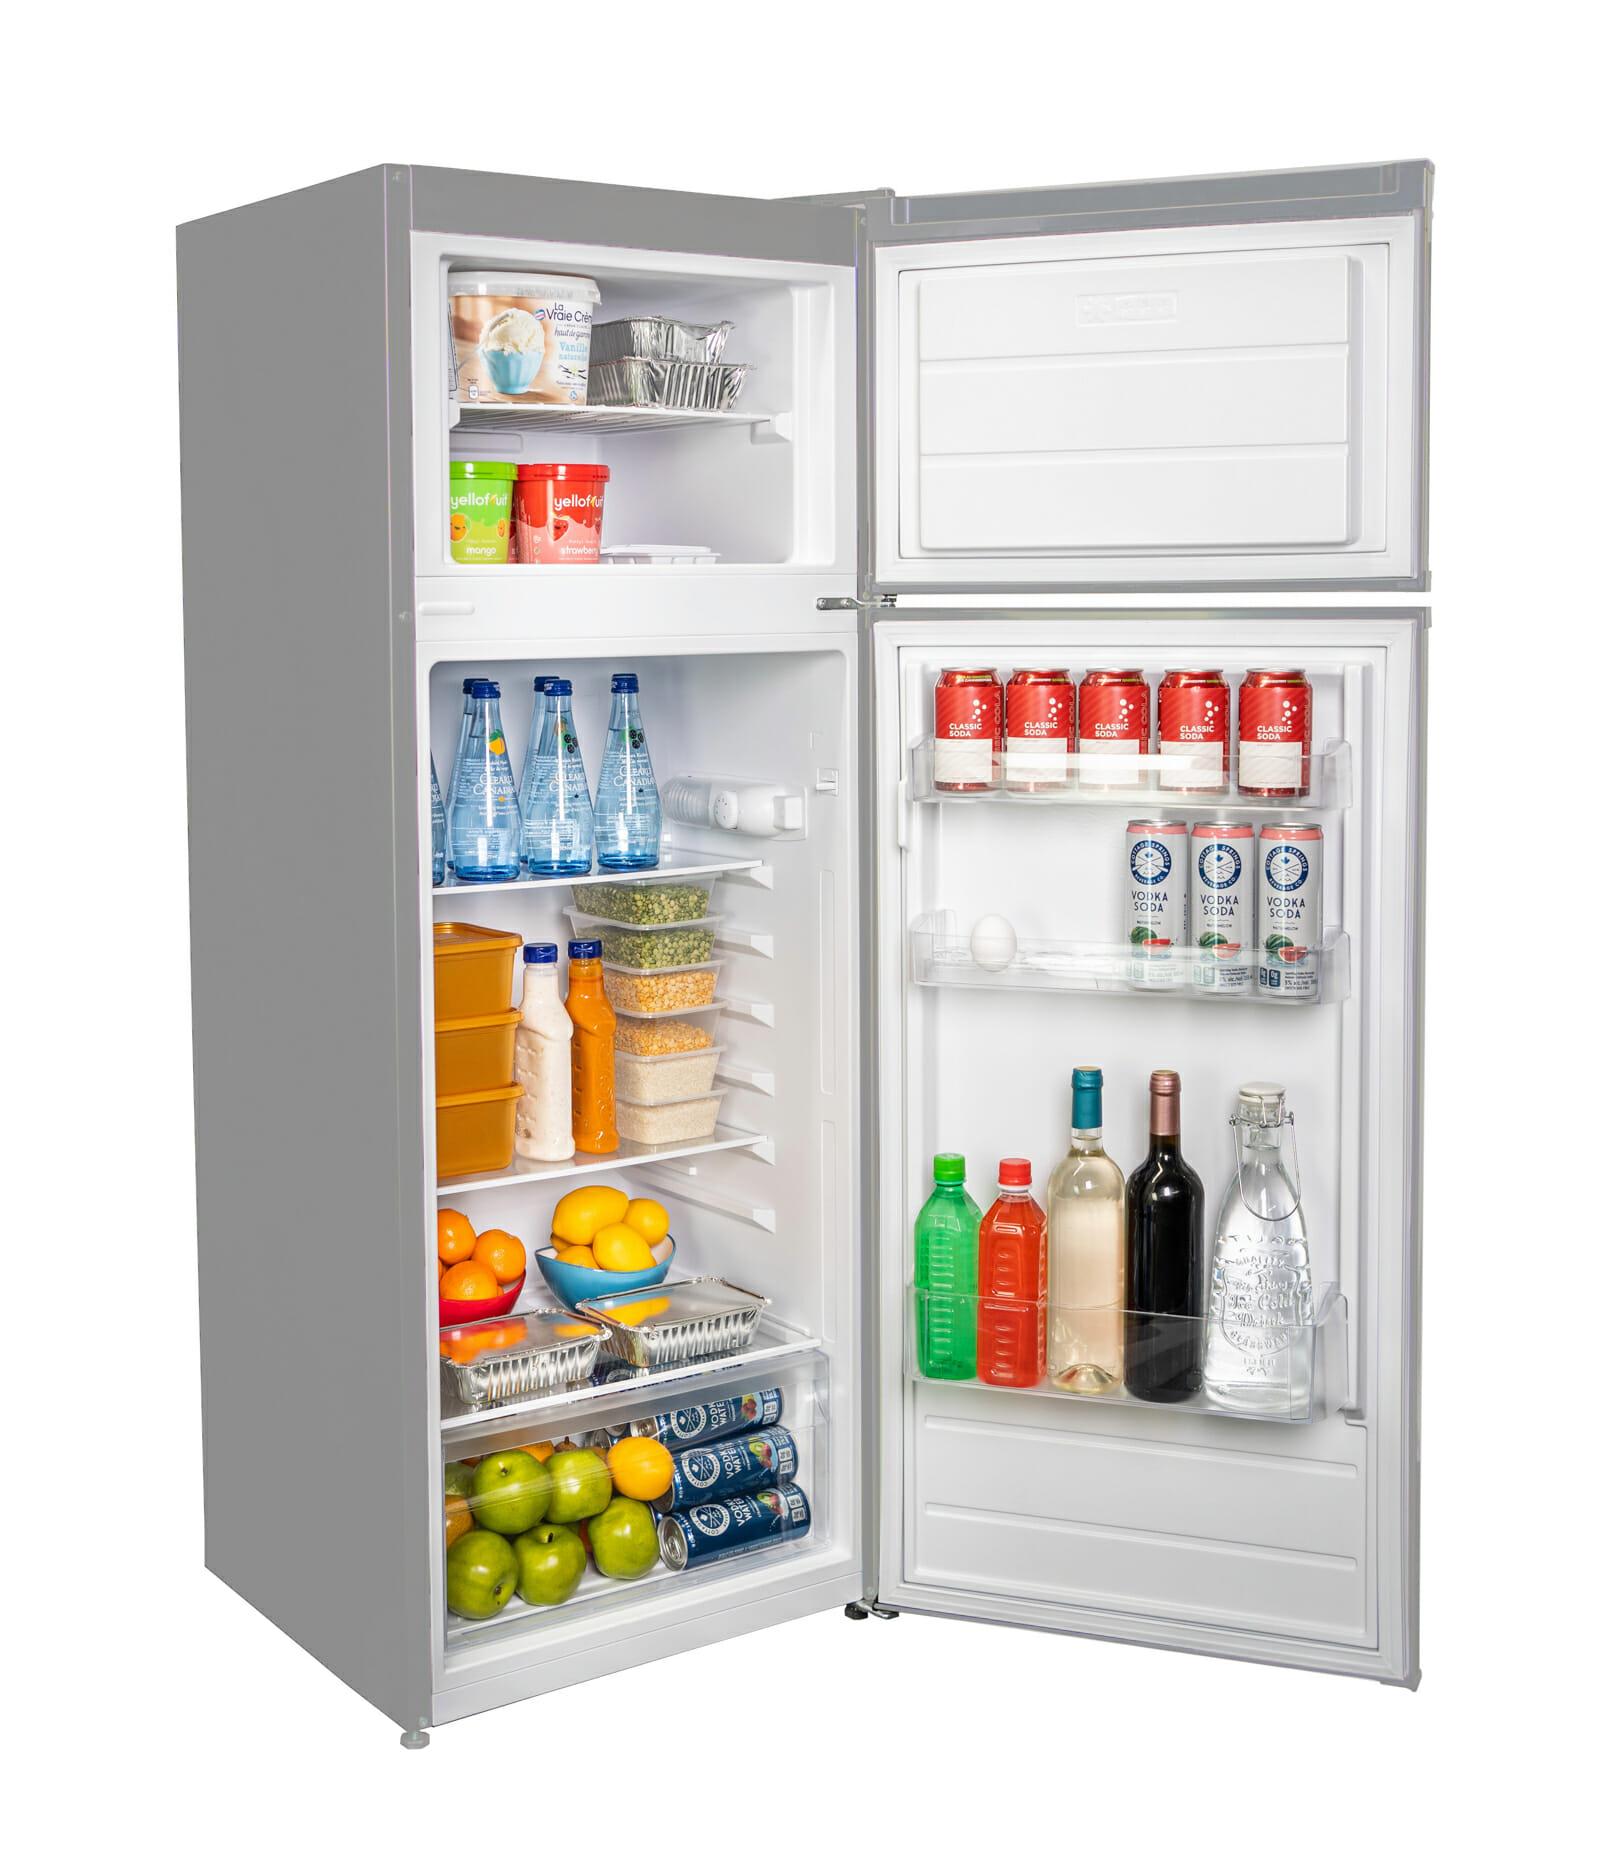 Danby 7.4 cu. ft. Partial Defrost Fridge in Stainless Steel